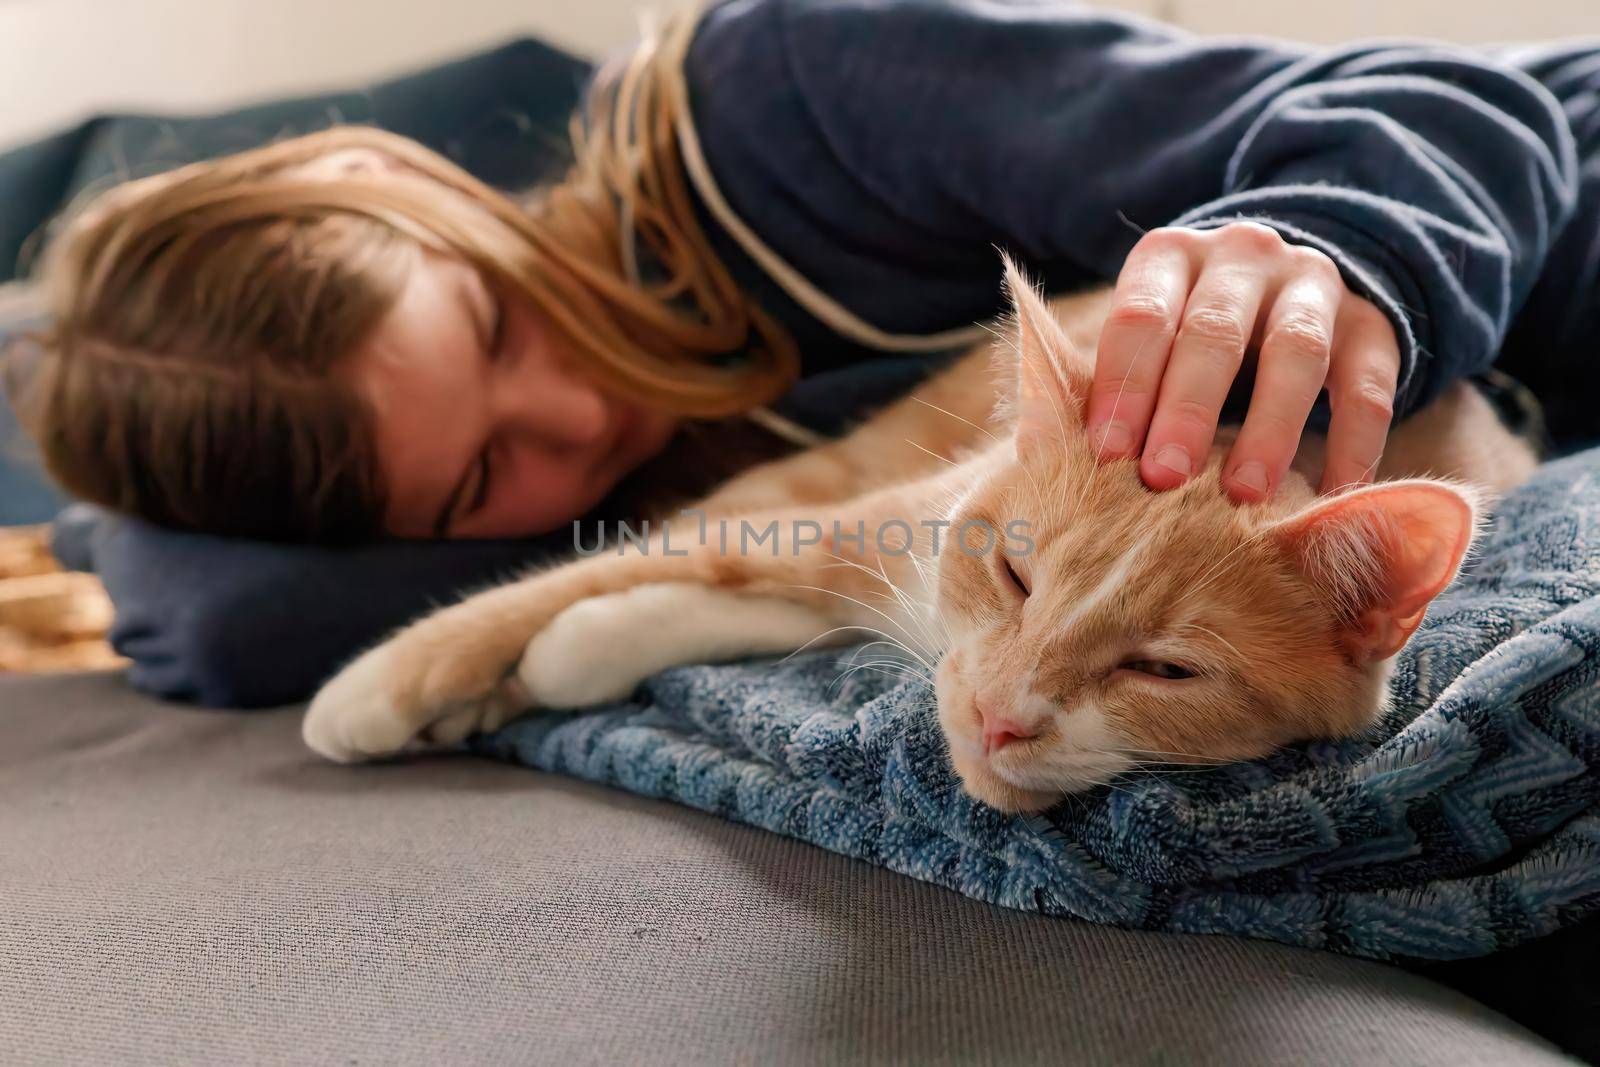 An Young Adolescent girl lying on a couch finds comfort by snuggling close to and petting her cat by markvandam